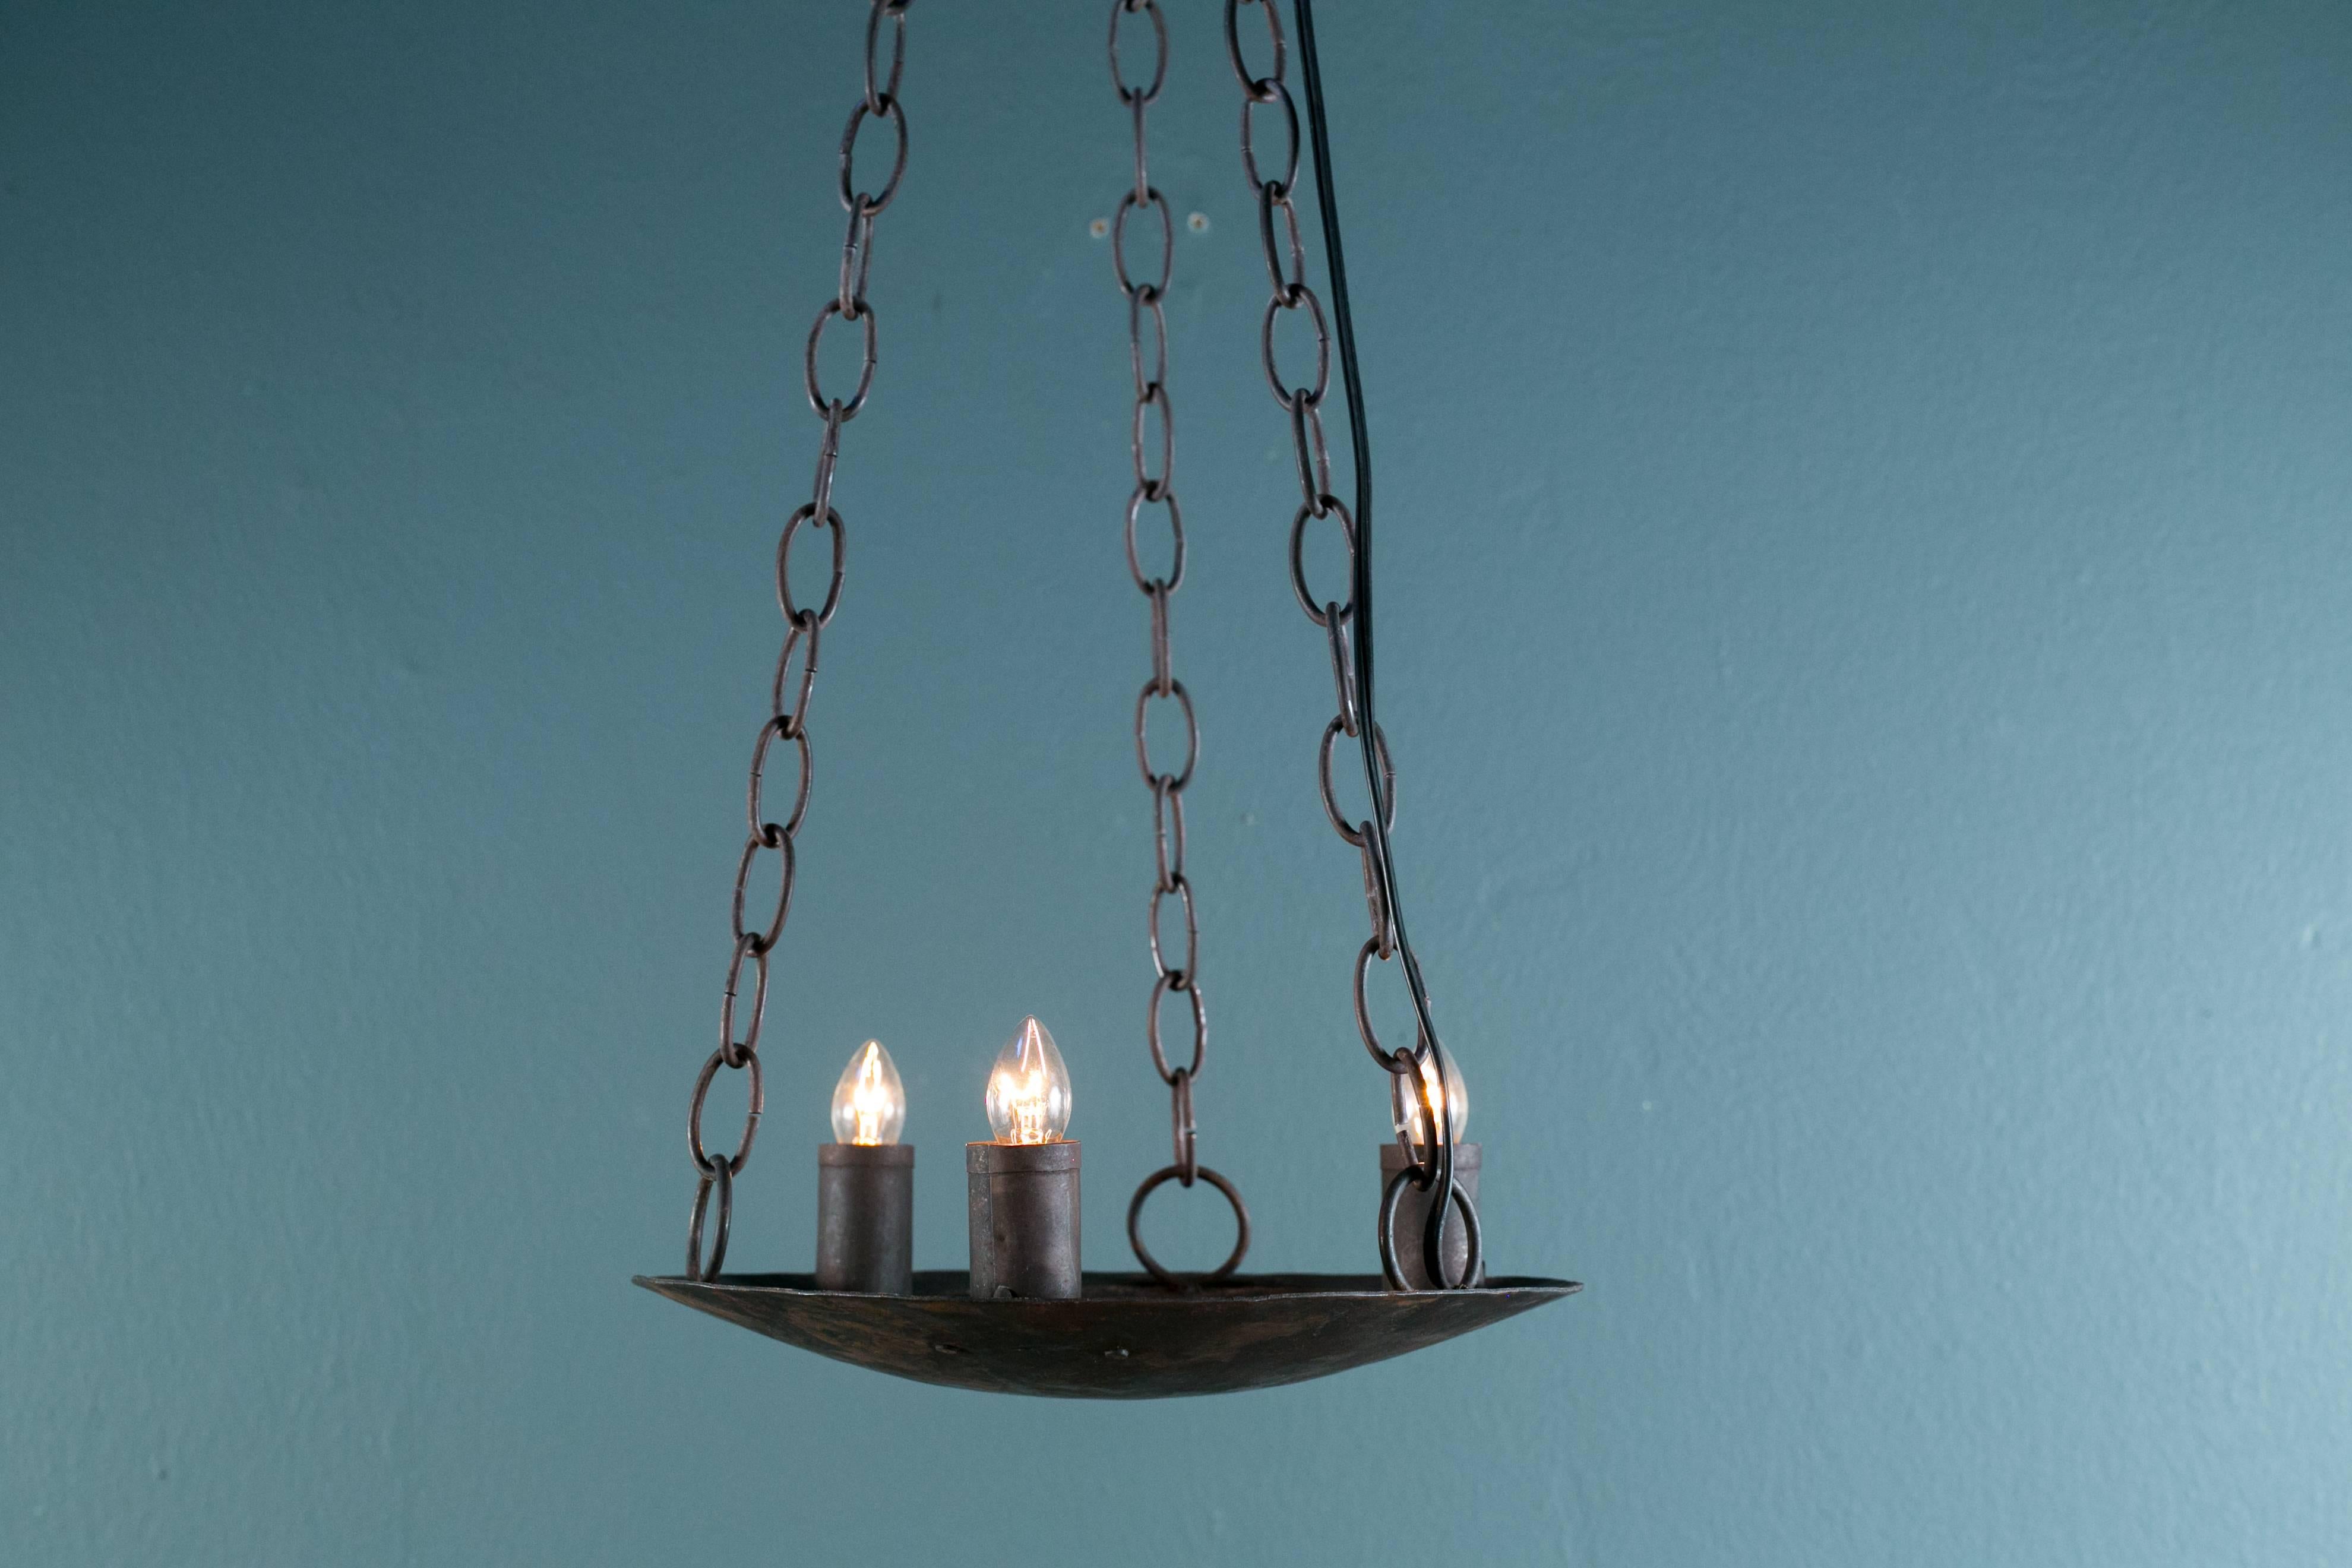 Simple and primitive hand-crafted iron light newly wired with all UL listed parts and three candelabra sockets. Metal candle sleeves on the sockets. Comes with three, three foot lengths of chain above the fixture that connect to a three-hooked